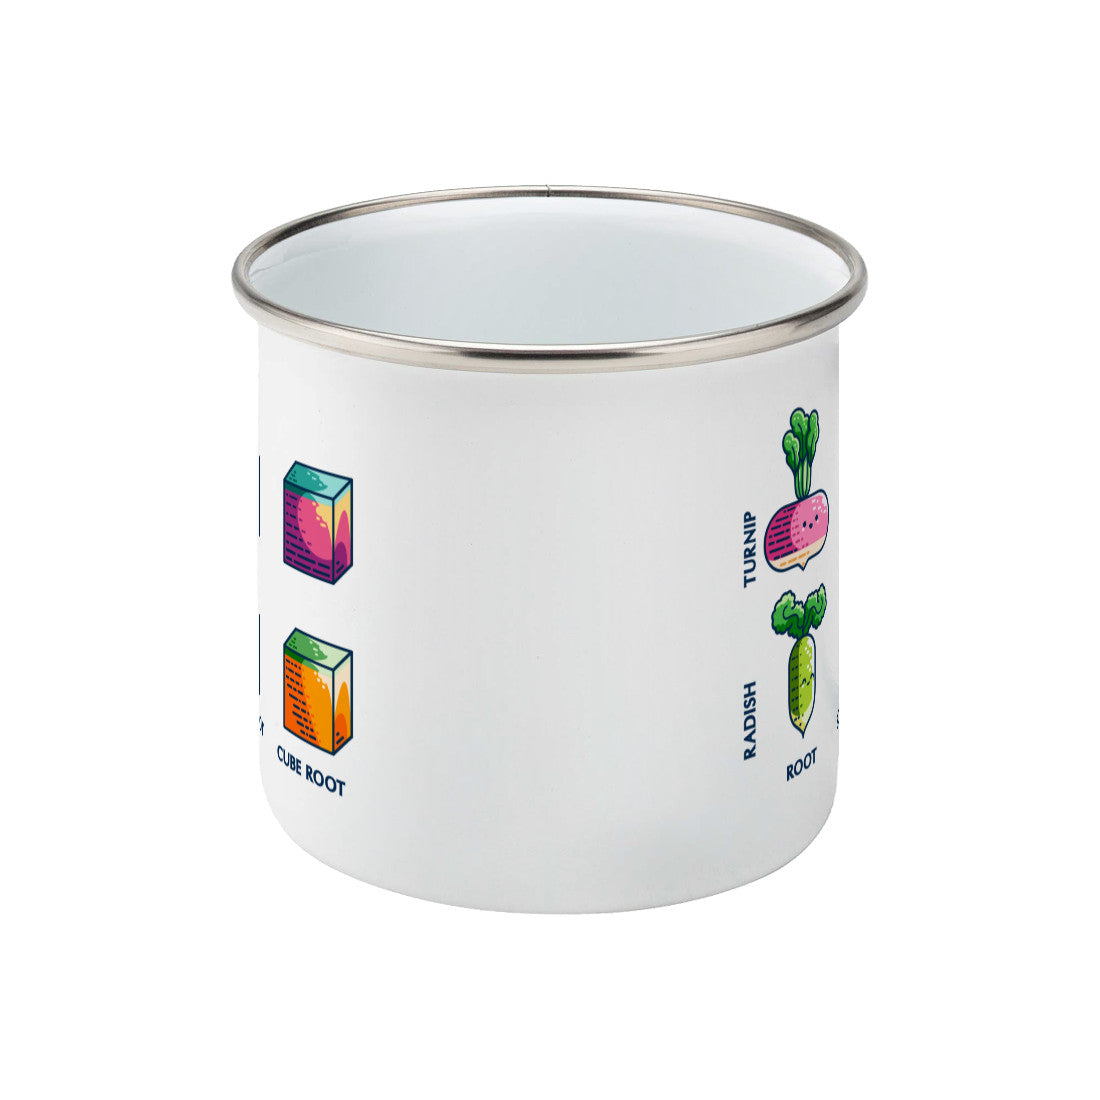 A side view of a white enamel mug with silver rim, handle not visible around the other side, and showing the edges the roots of maths design.